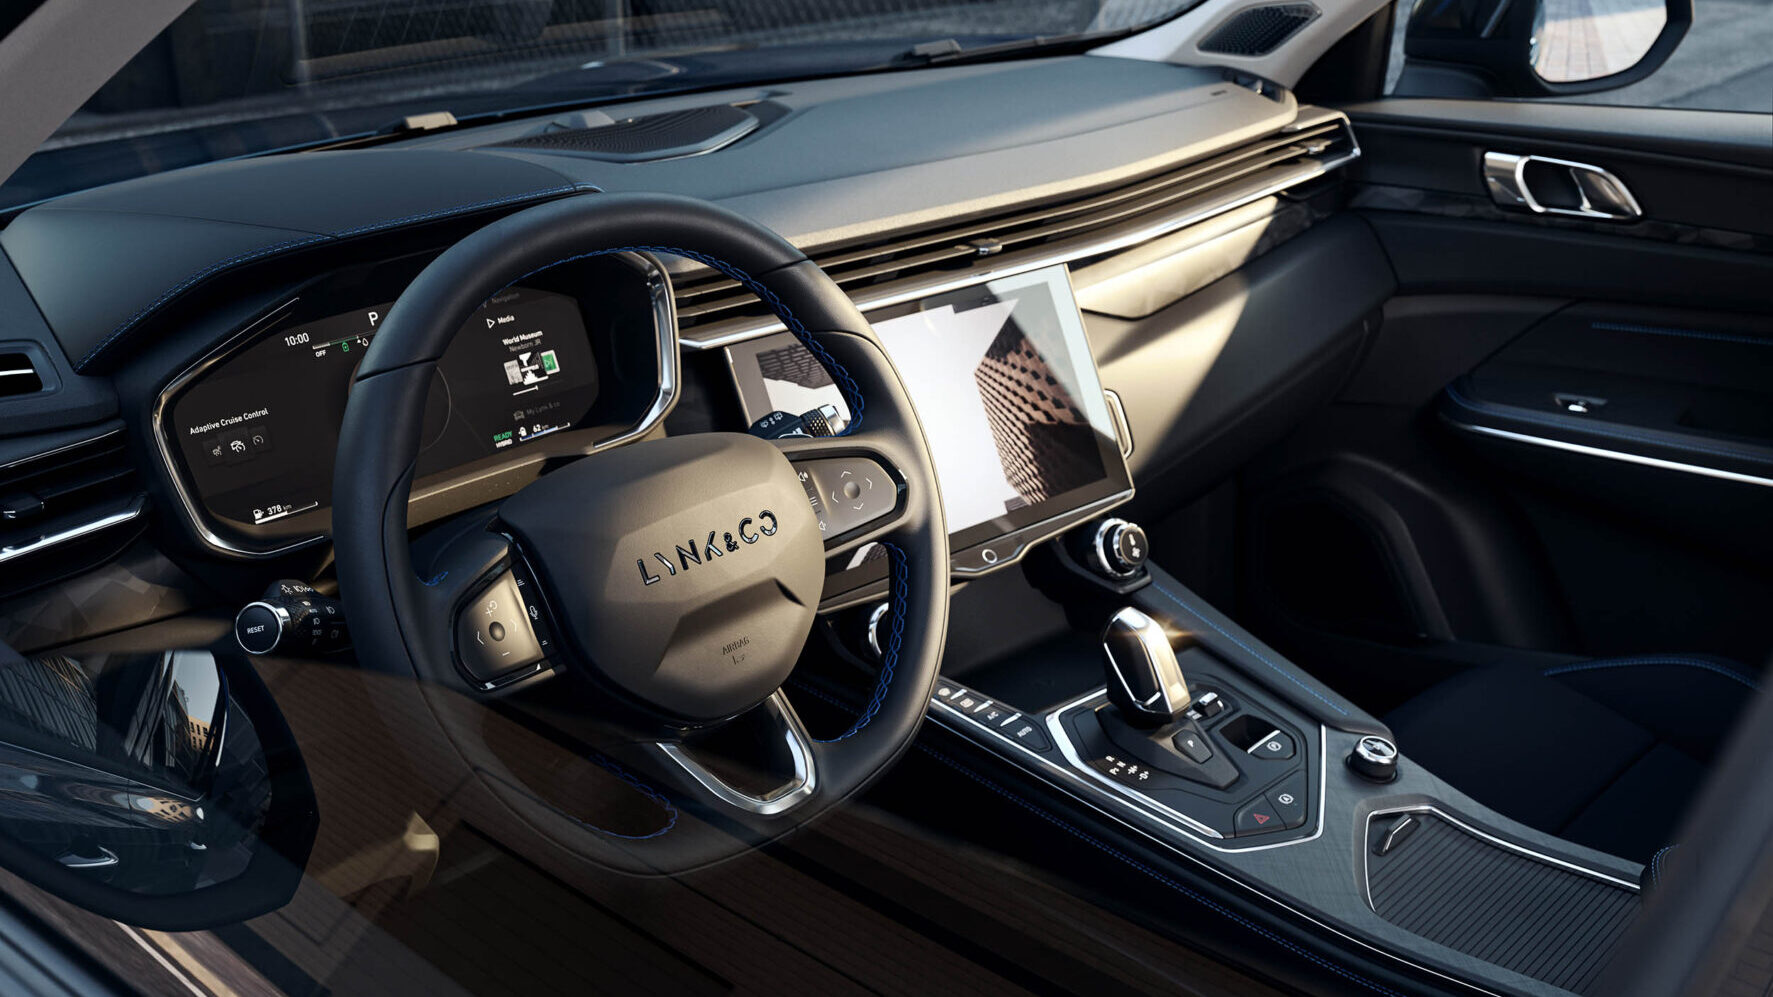 The Interior Of the Lynk & Co 01 Looks Beautiful